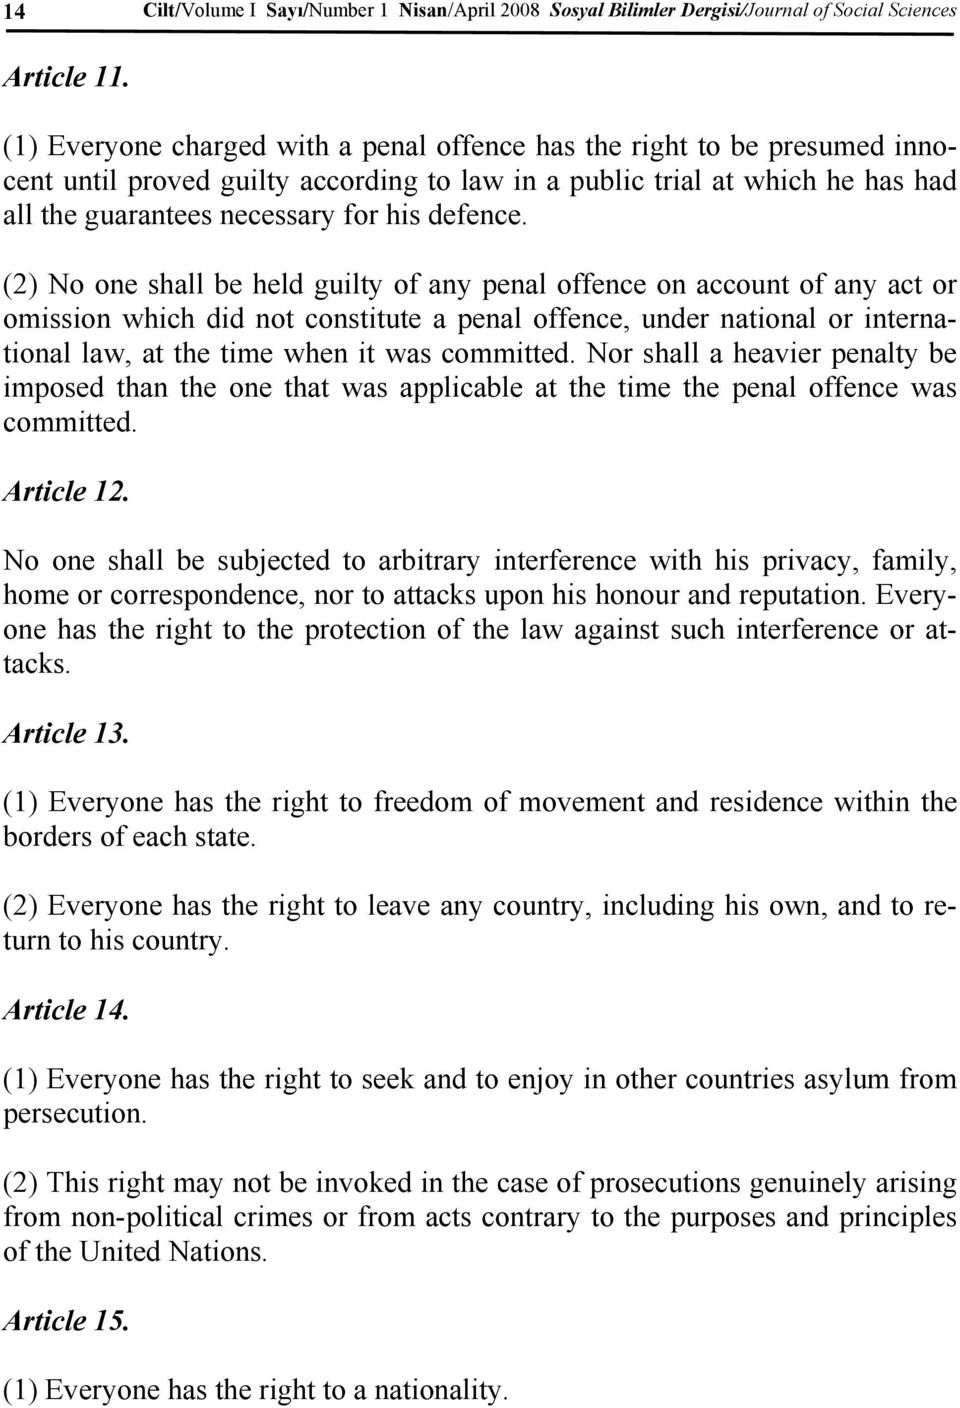 (2) No one shall be held guilty of any penal offence on account of any act or omission which did not constitute a penal offence, under national or international law, at the time when it was committed.